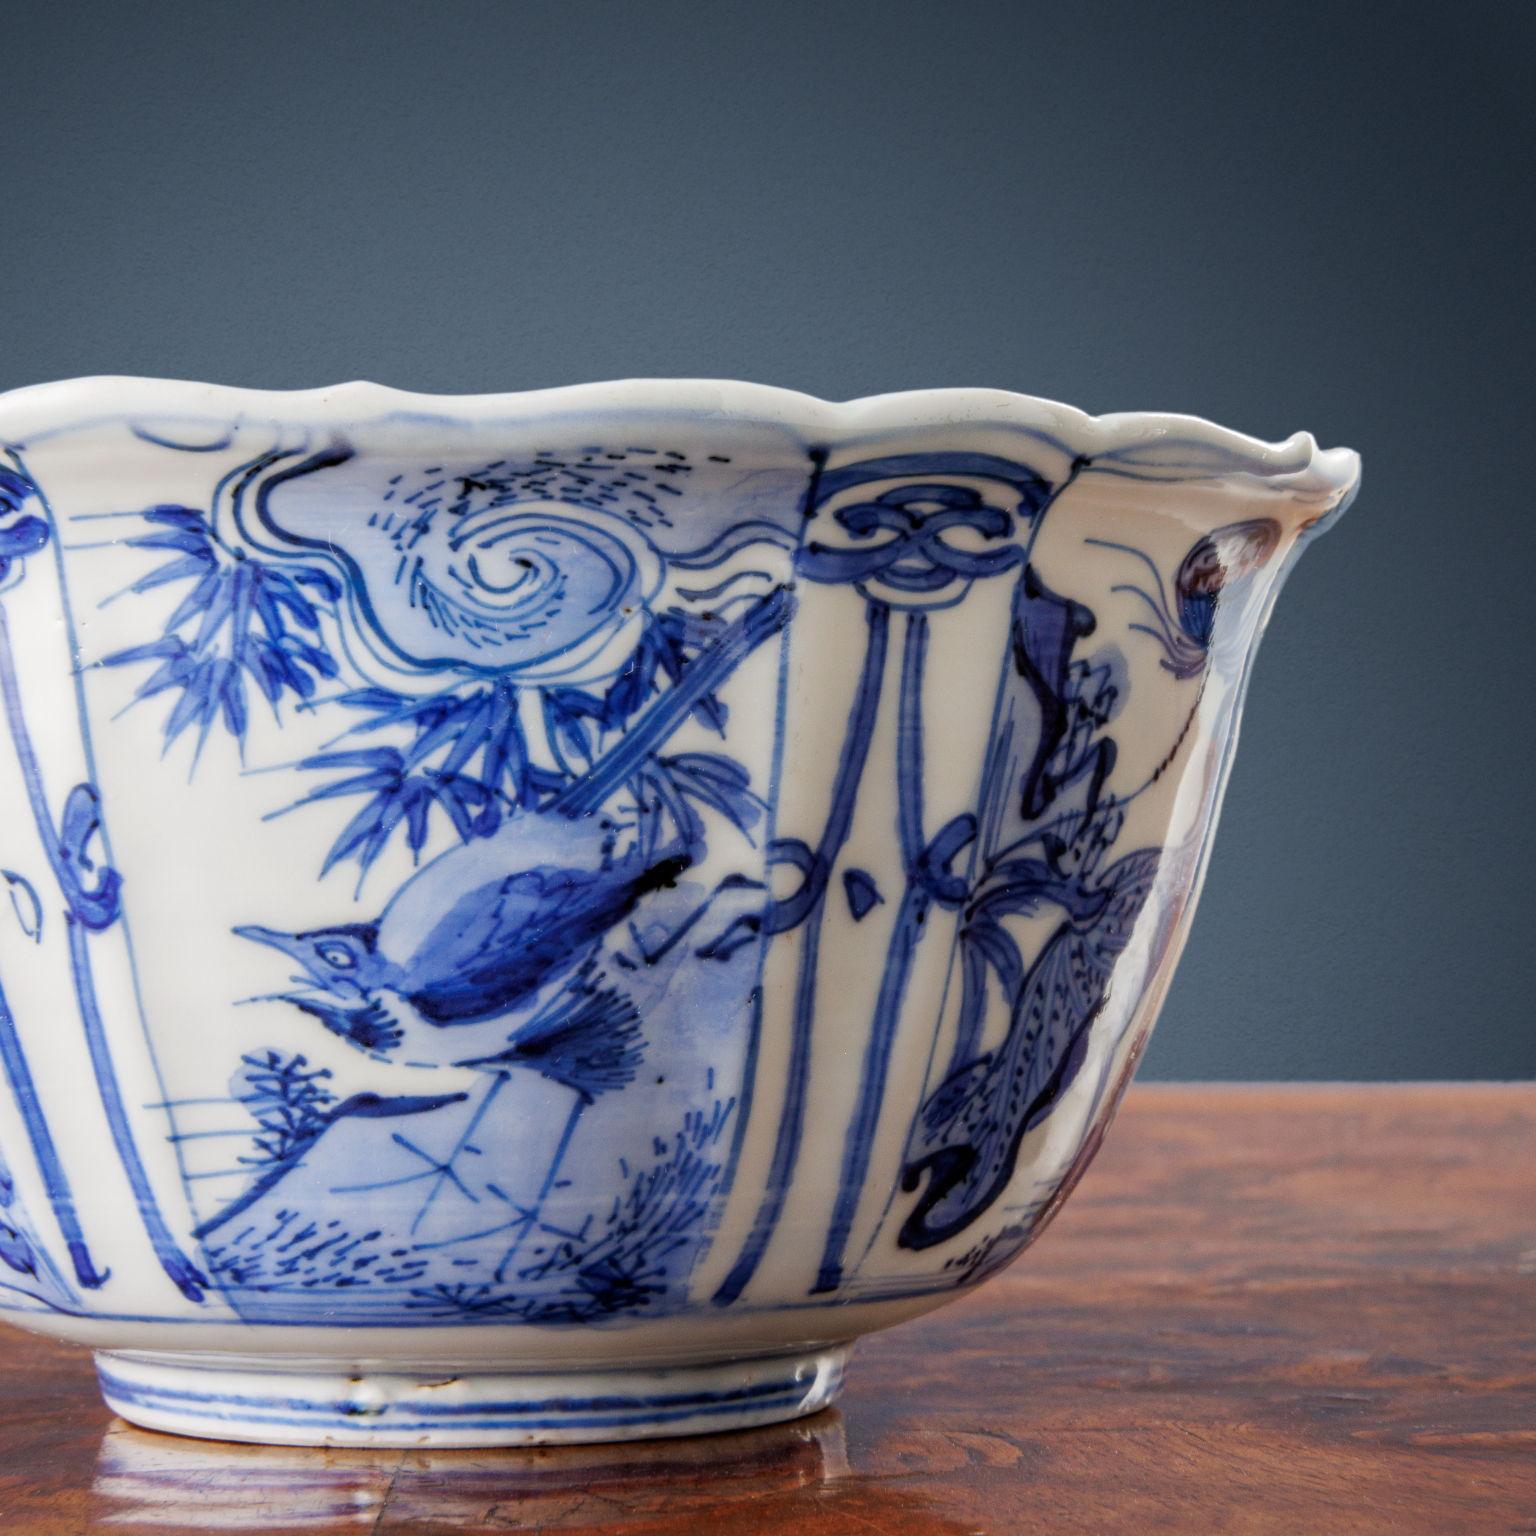 Kraak Porcelain Bowl, China, Ming Period, Wanli Period '1573 -1619' In Good Condition For Sale In Milano, IT